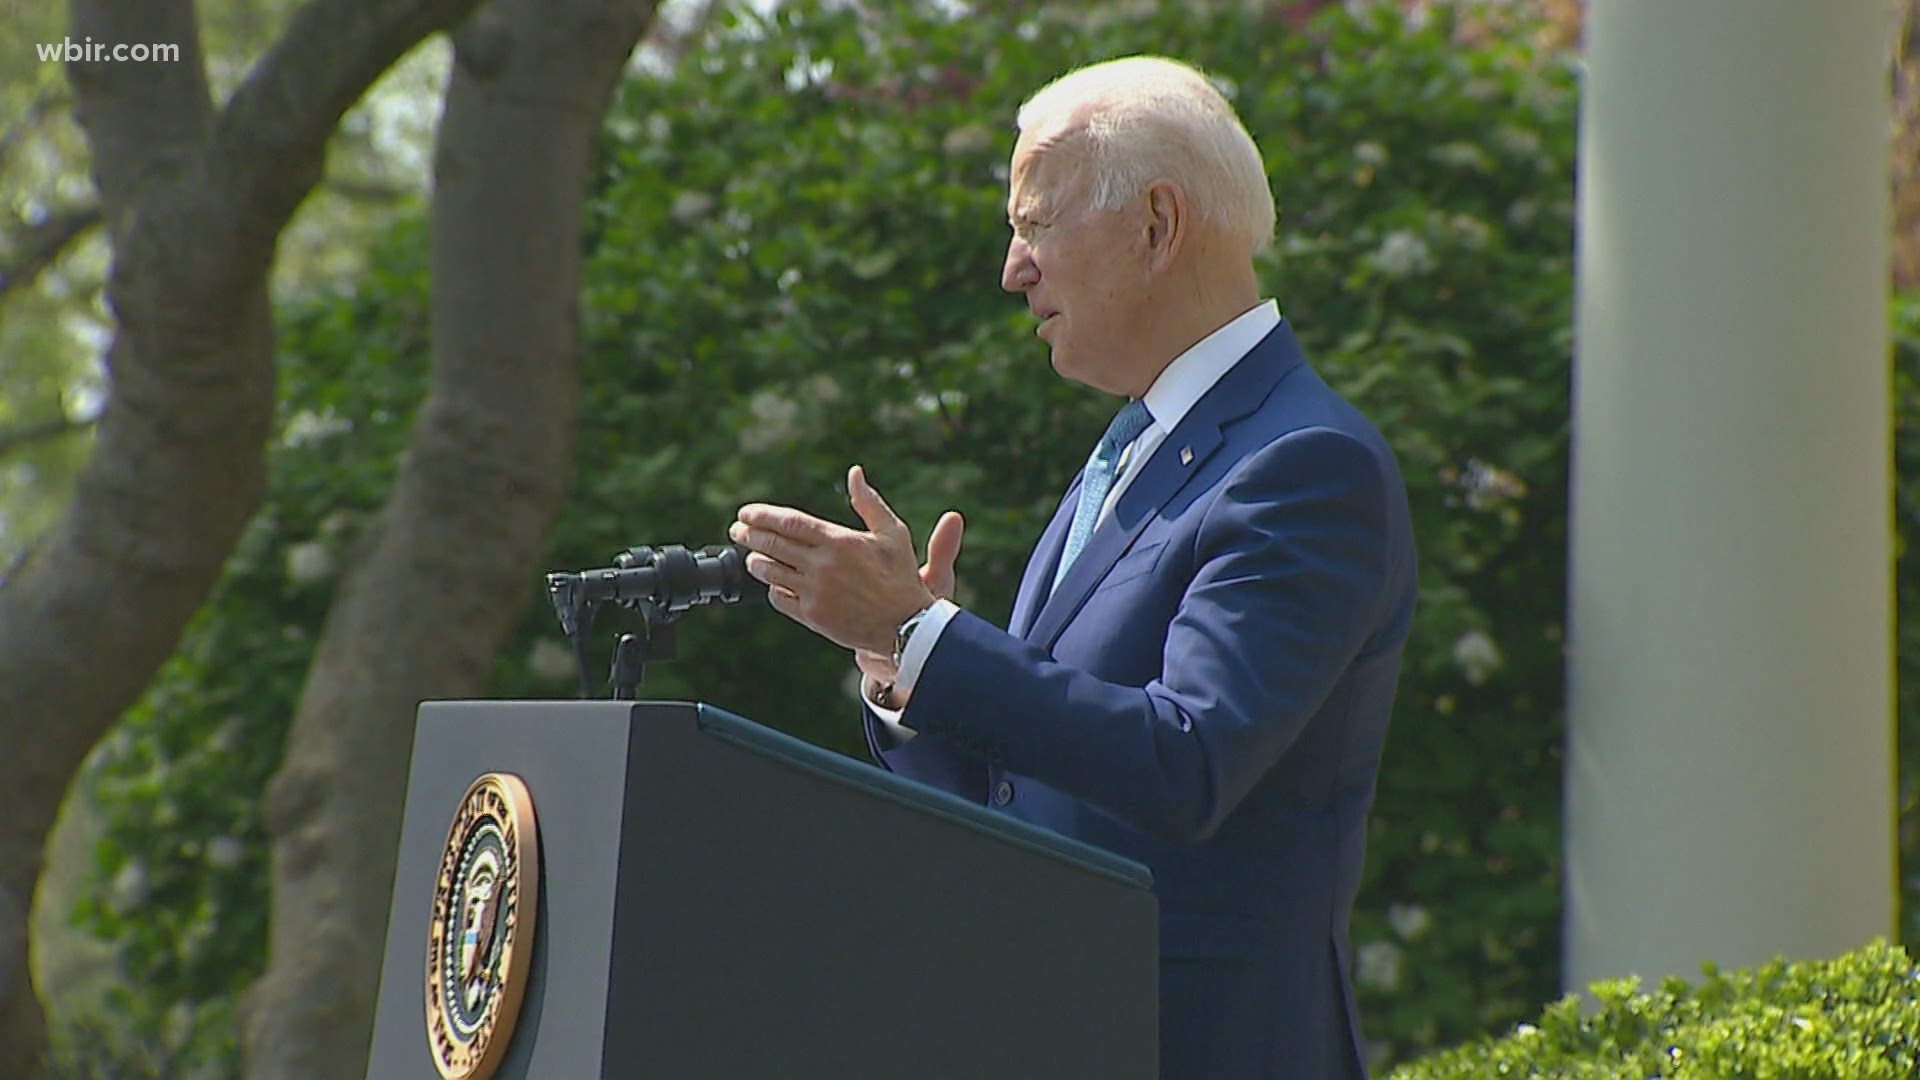 President Biden outlined six executive orders, which include requiring serial numbers and background checks for so-called "ghost guns."